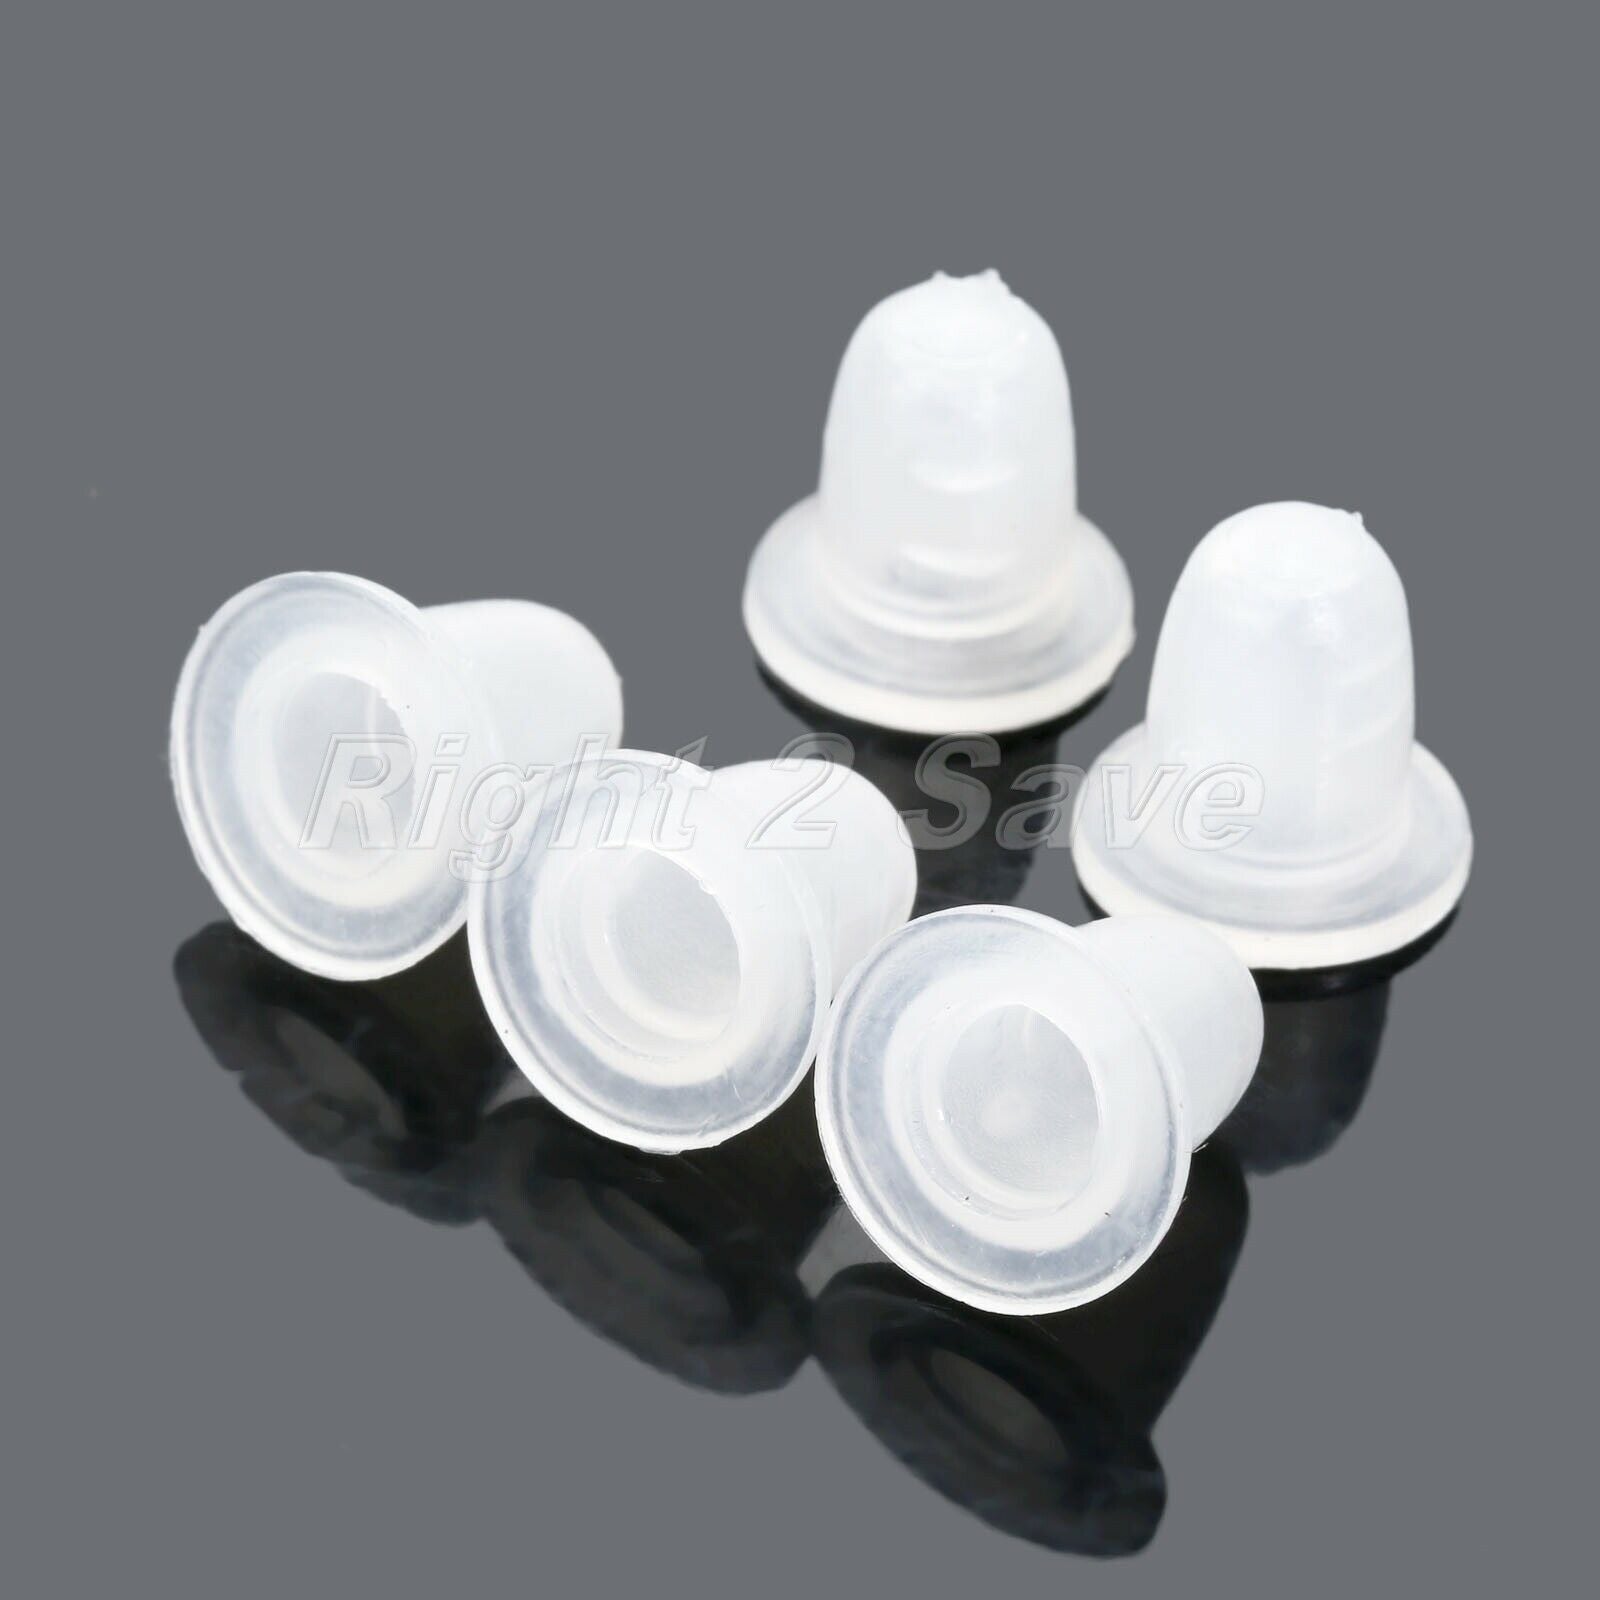 Ink Cups Caps 50pcs Soft Silicone For Tattoo Machine Needles Eyebrow Lip Makeup